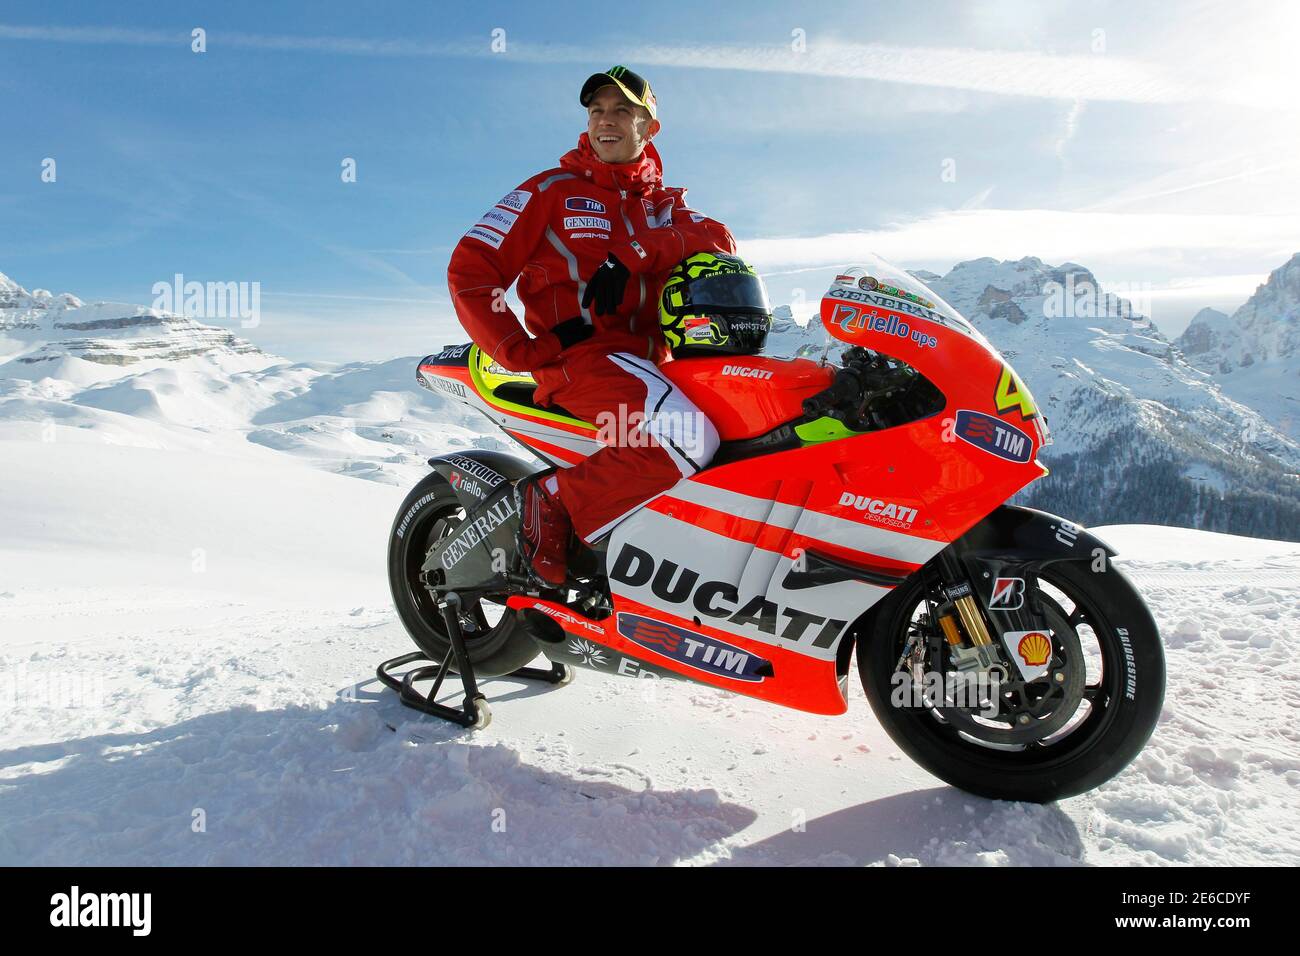 Ducati MotoGP rider Valentino Rossi poses during an official presentation  of his new bike, the Ducati GP2011 during the "Wrooom, F1 and MotoGP Press  Ski Meeting", Ducati and Ferrari's annual media gathering